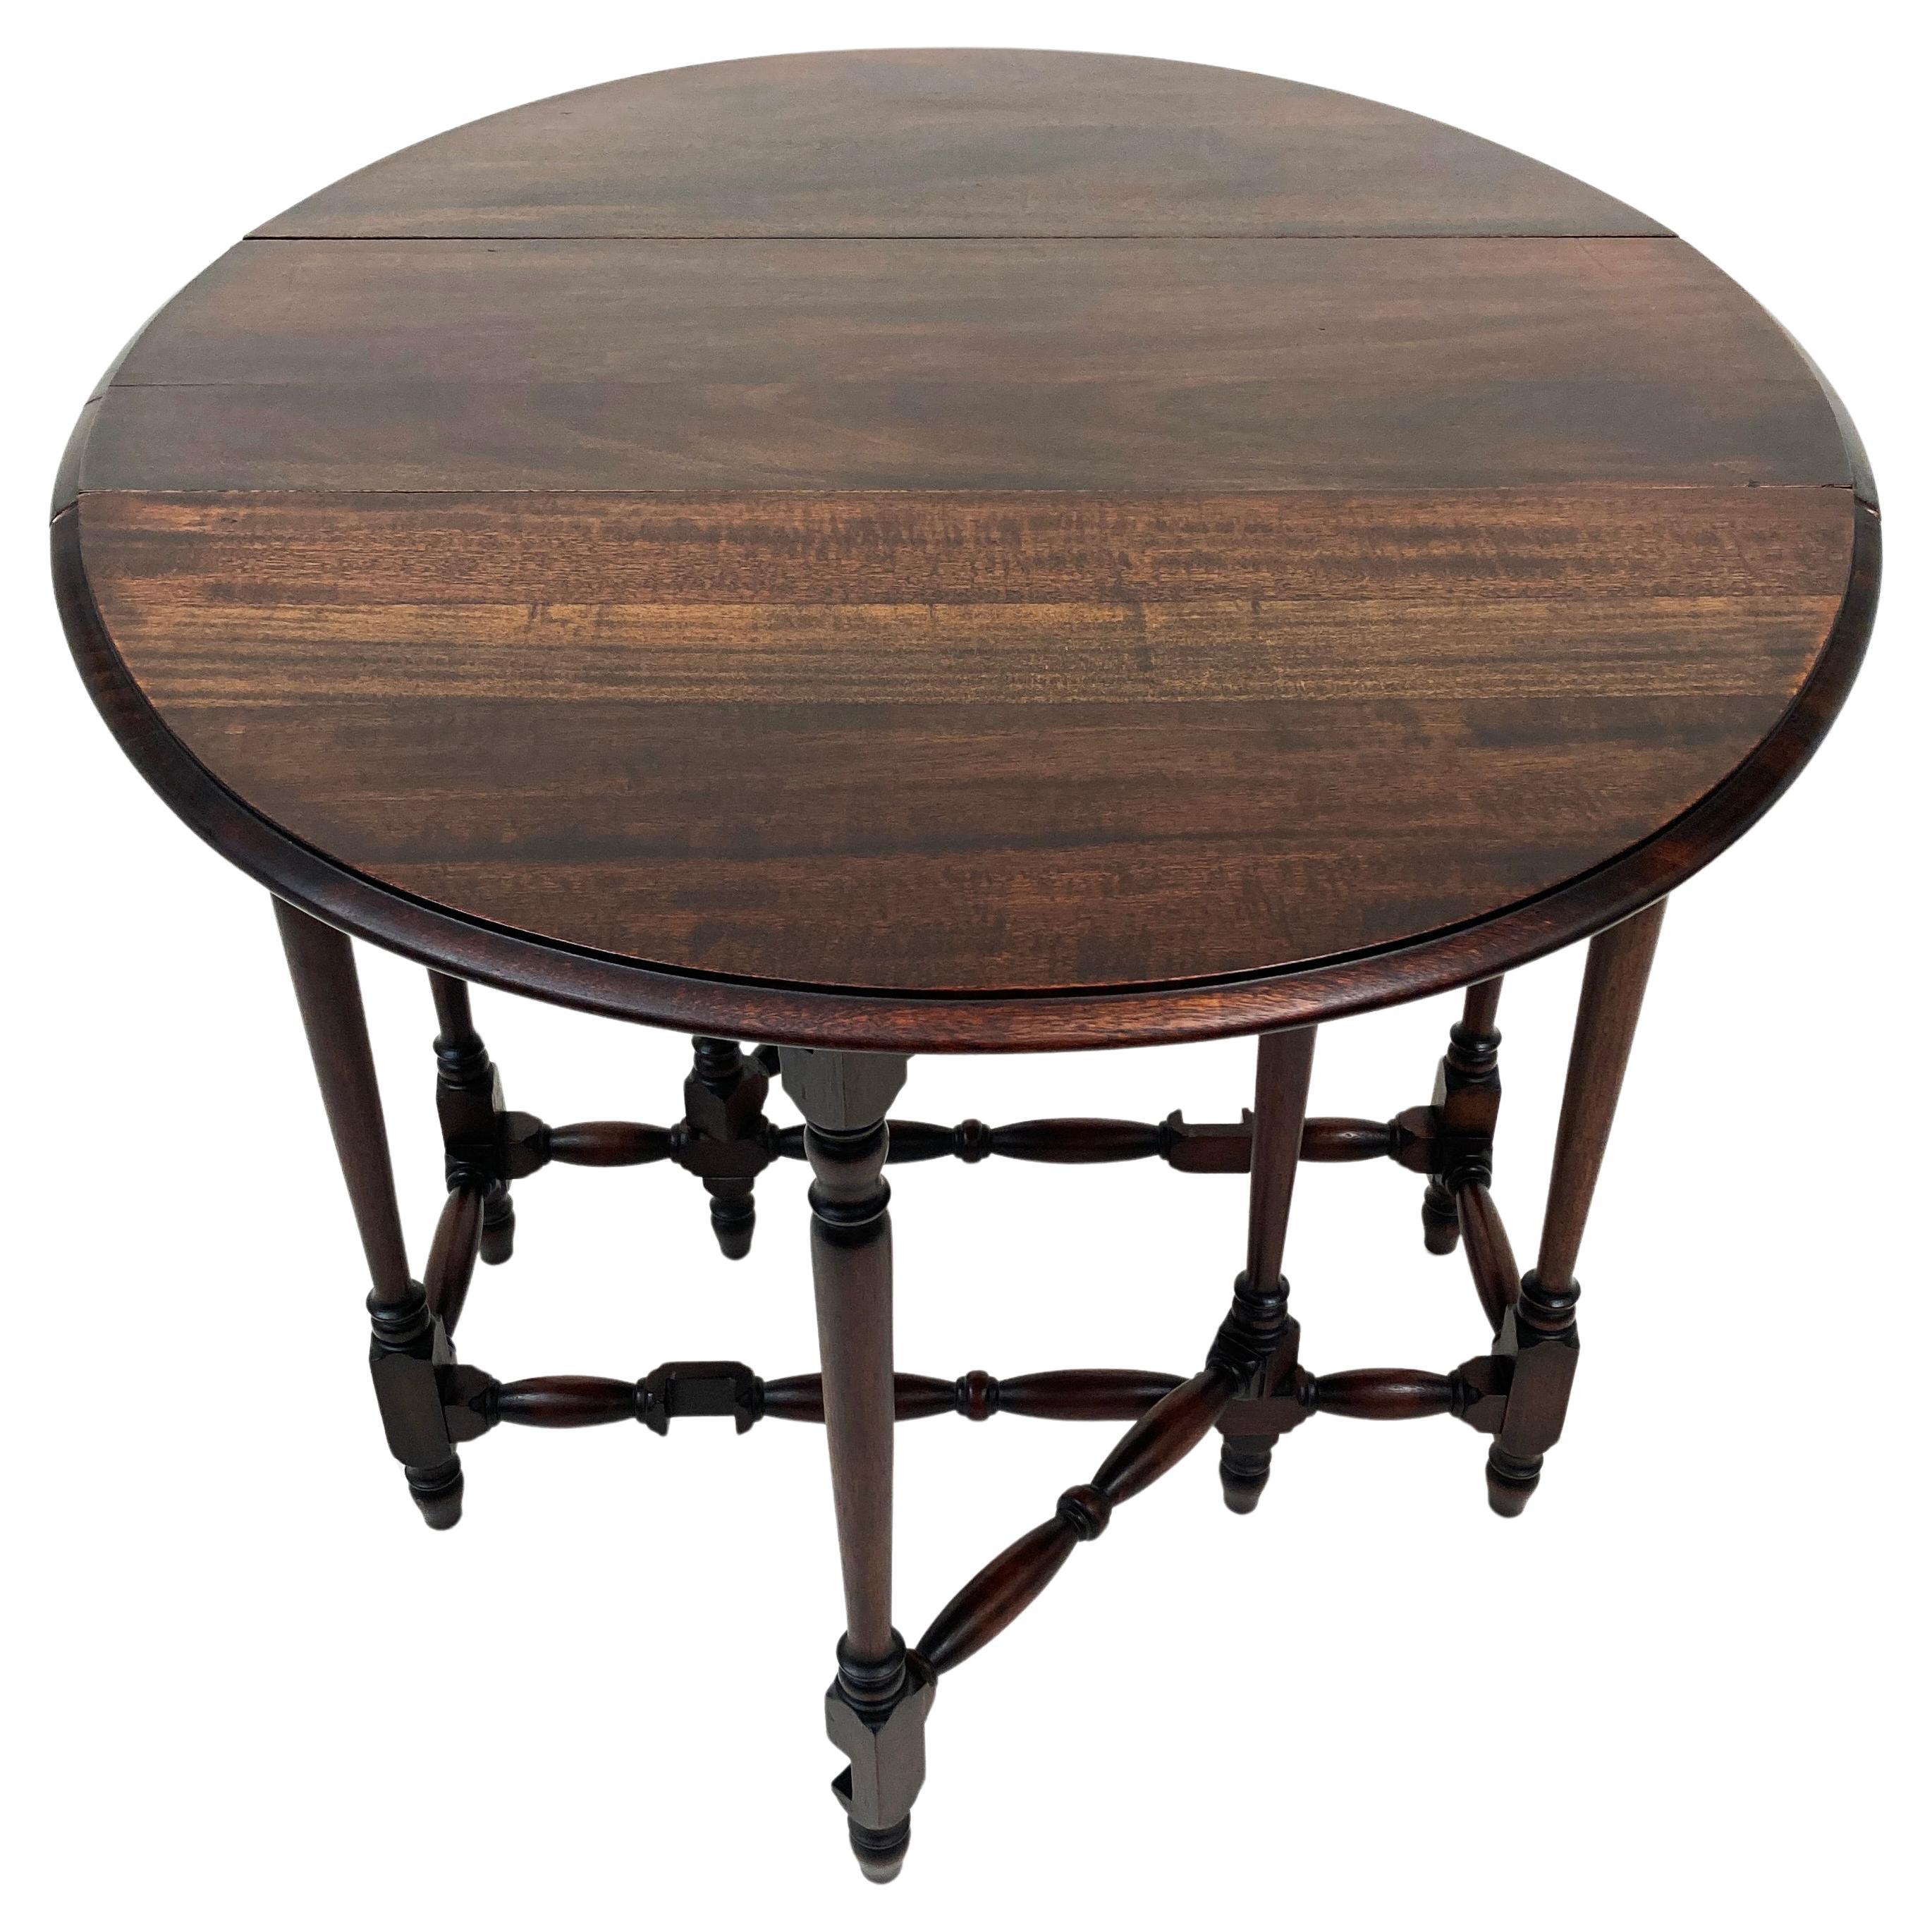 Late 18th Century English William and Mary Drop Leaf Gate-Leg Walnut Table For Sale